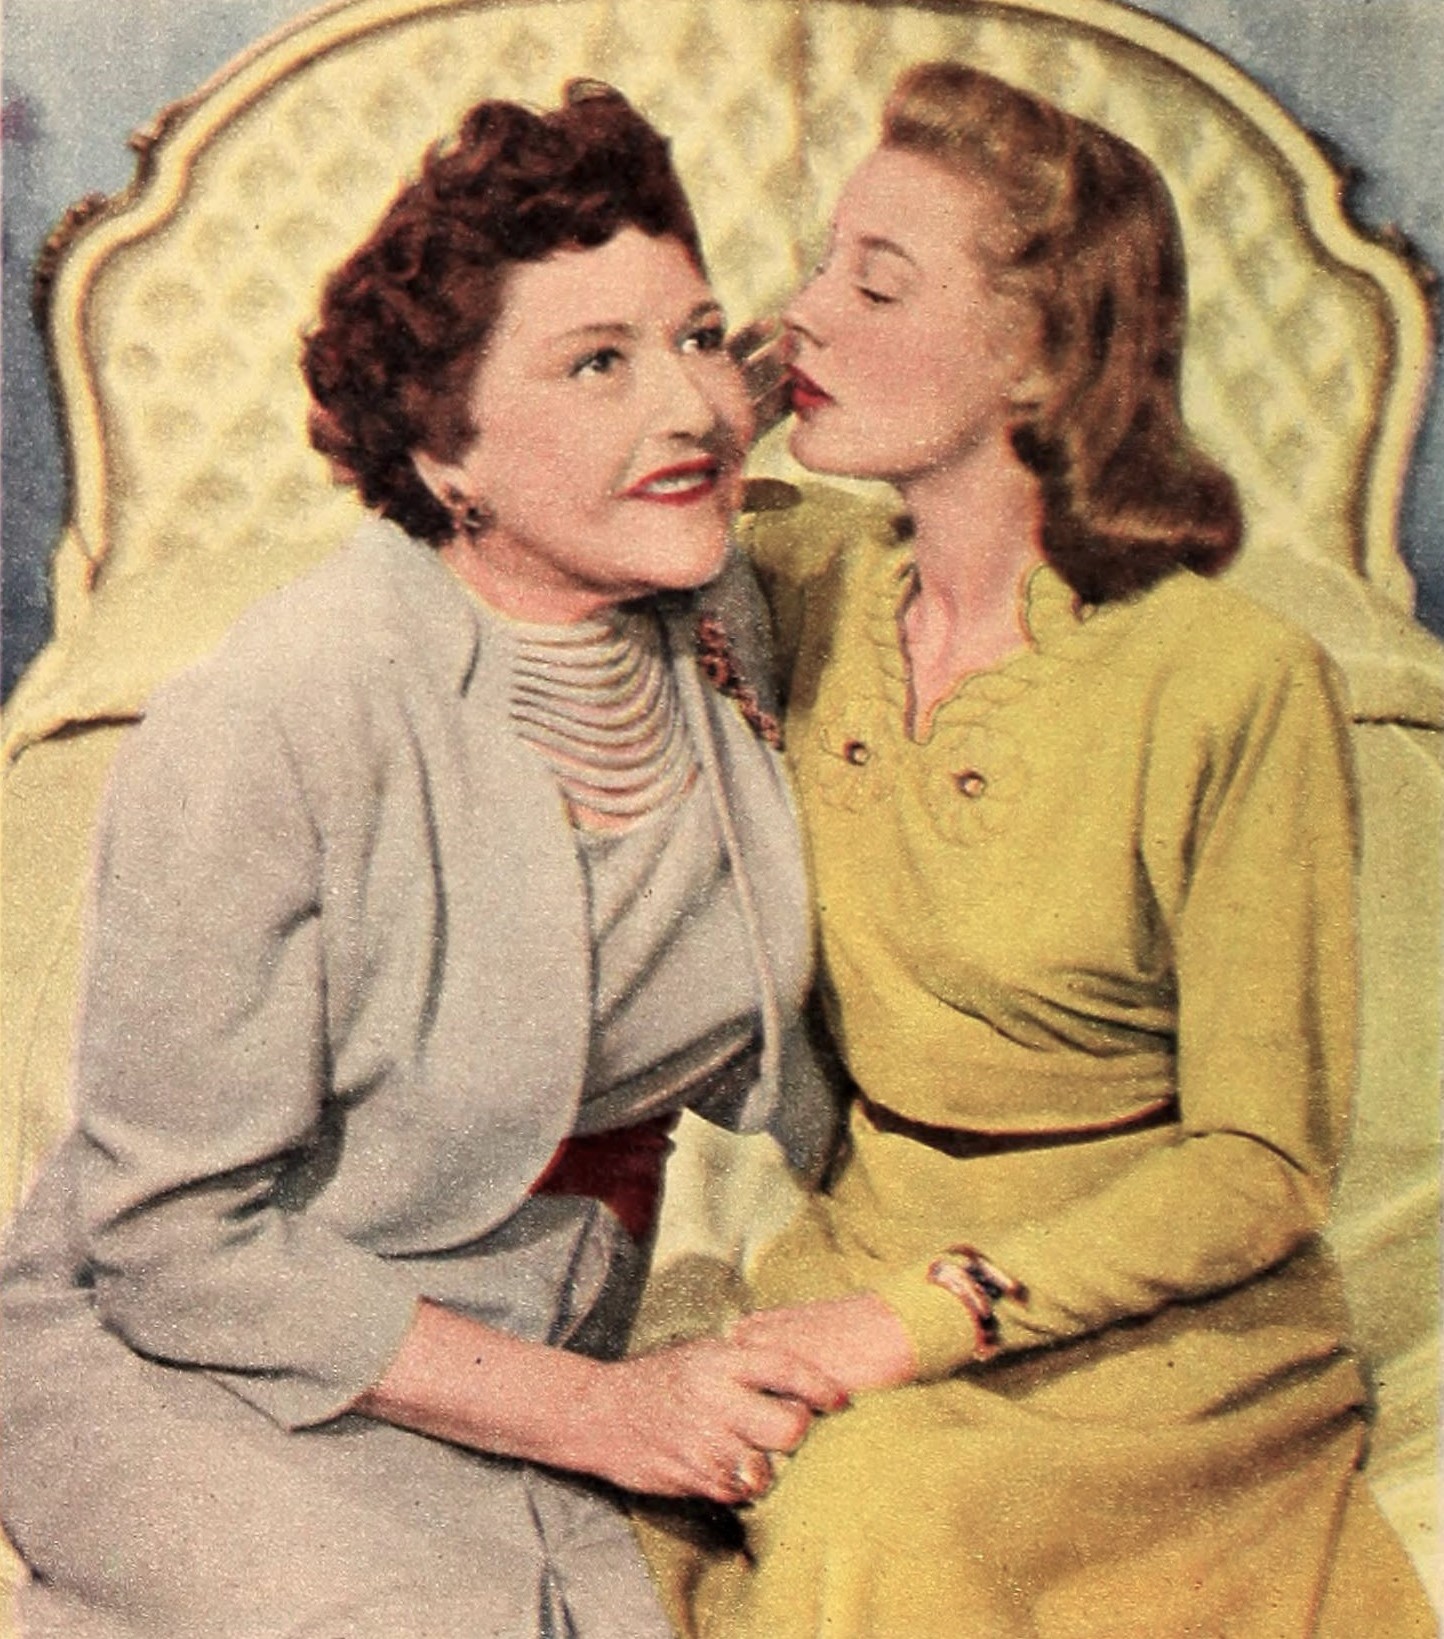 File Louella Parsons And June Allyson 1946 Jpg Wikimedia Commons